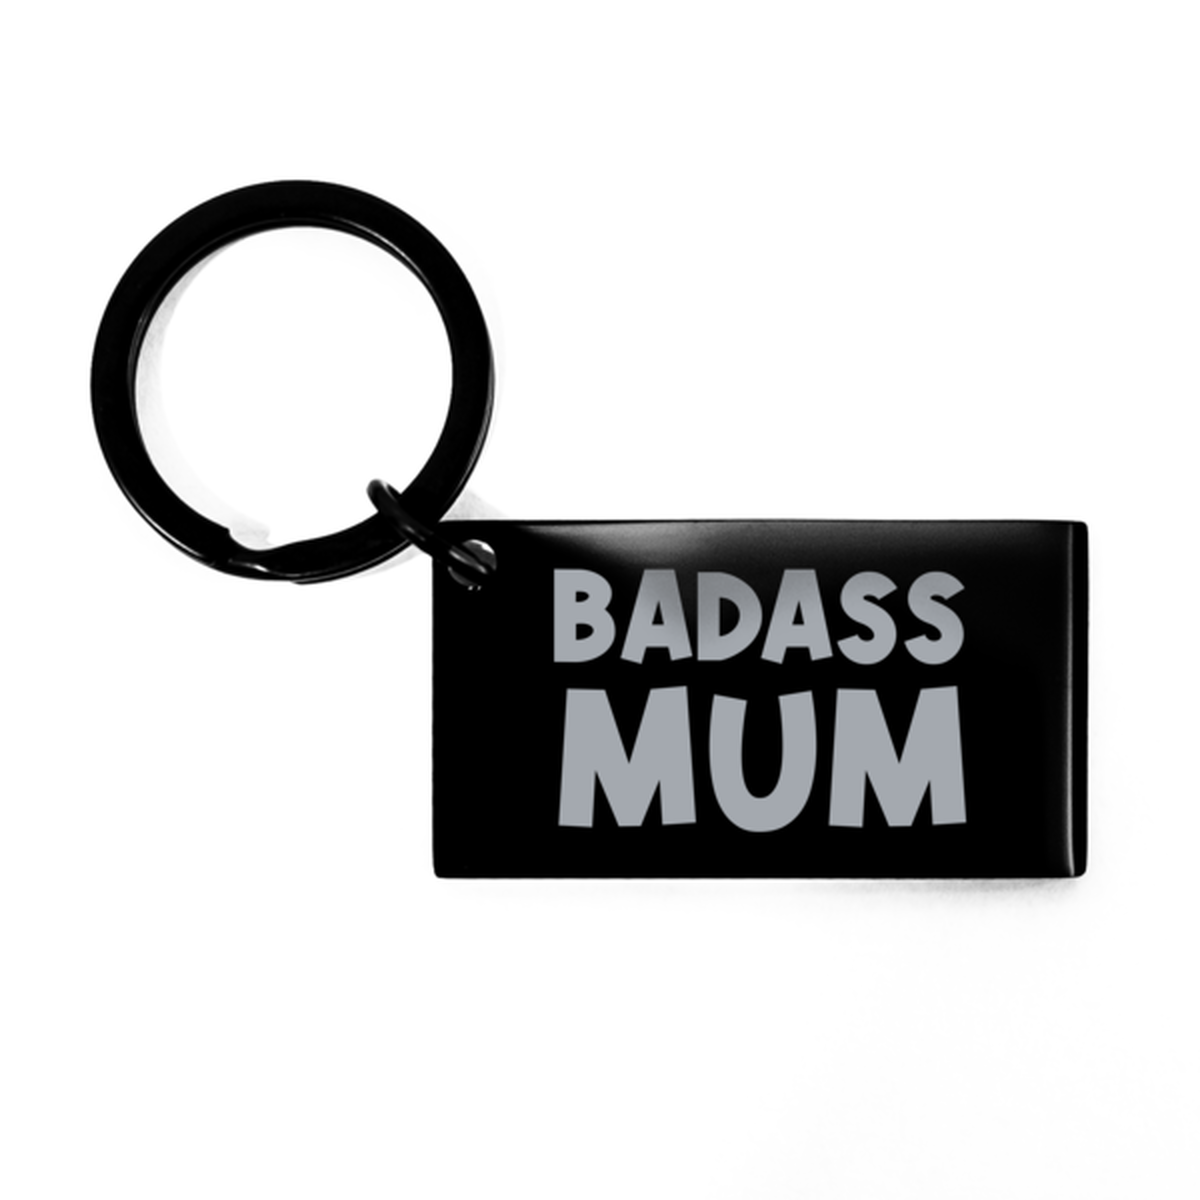 Mum Black Keychain, Badass Mum, Funny Family Gifts  Keyring For Mum From Son Daughter